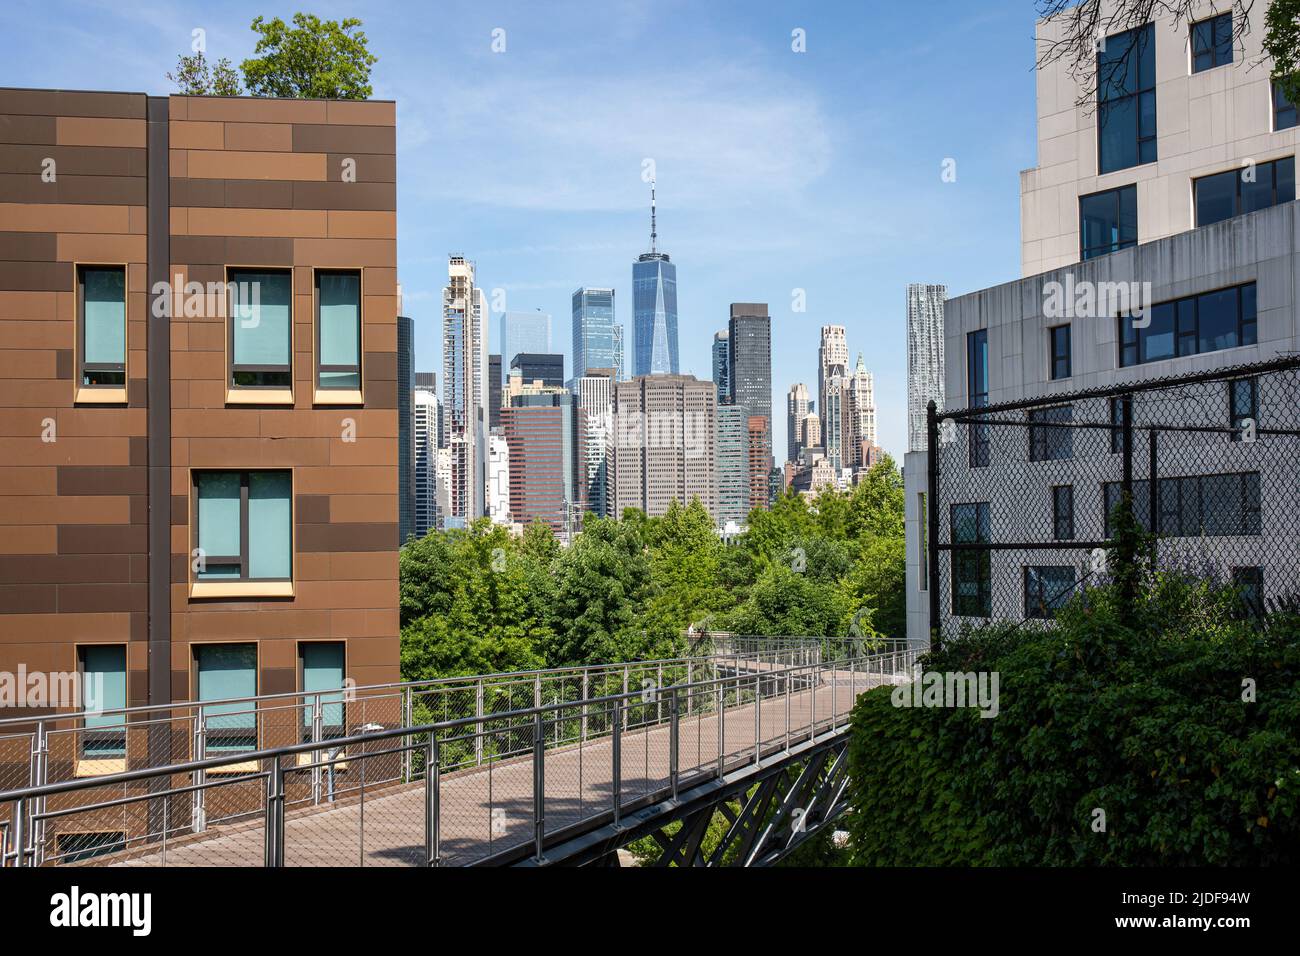 Squibb Park Bridge pedestrian pathway between Brooklyn Heights residential buildings with Lower Manhattan skyscrapers in the background in NYC, USA Stock Photo